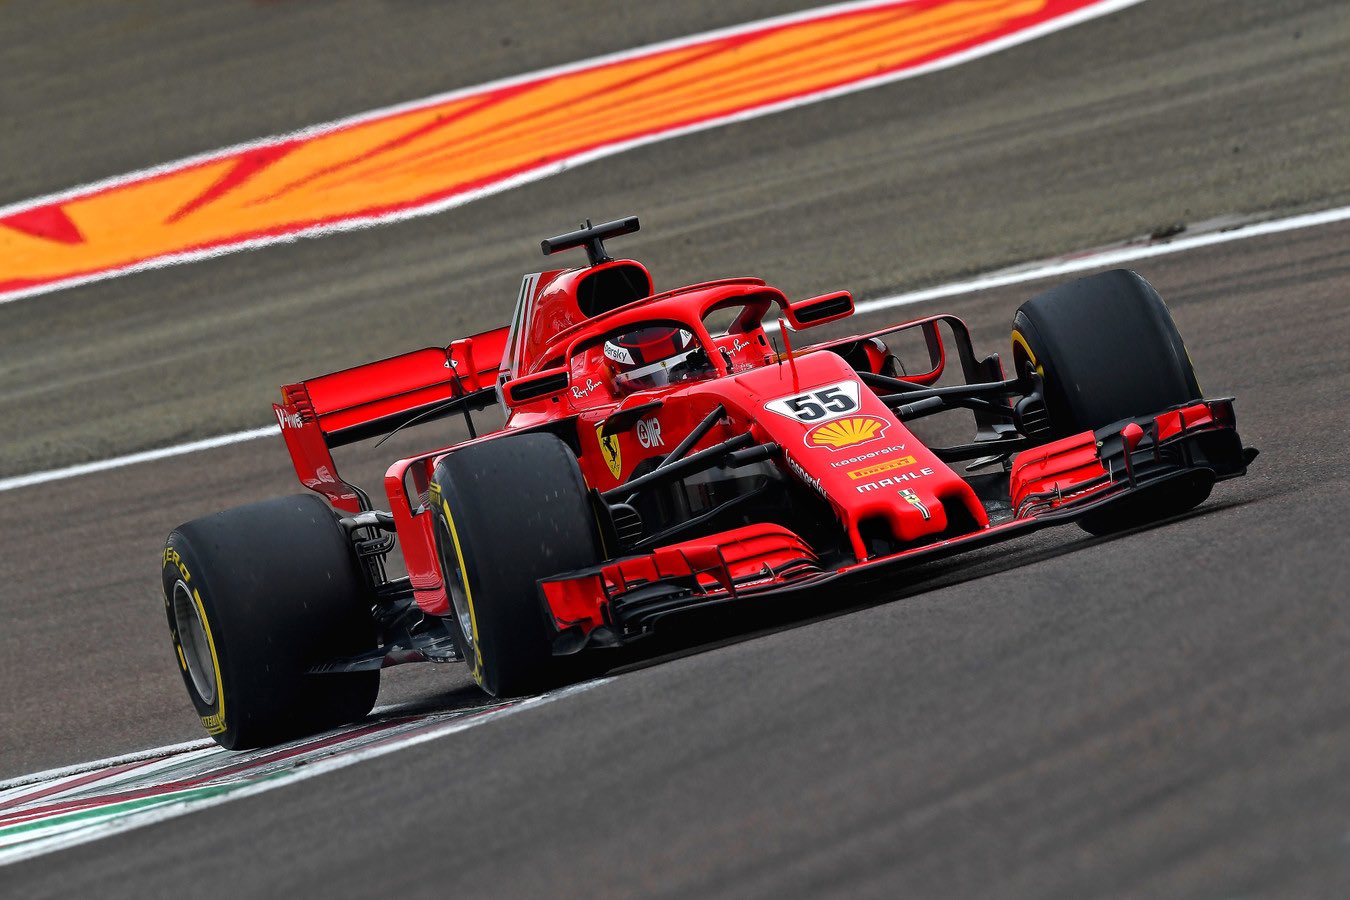 Carlos Sainz completes over 100 laps in first Ferrari F1 test